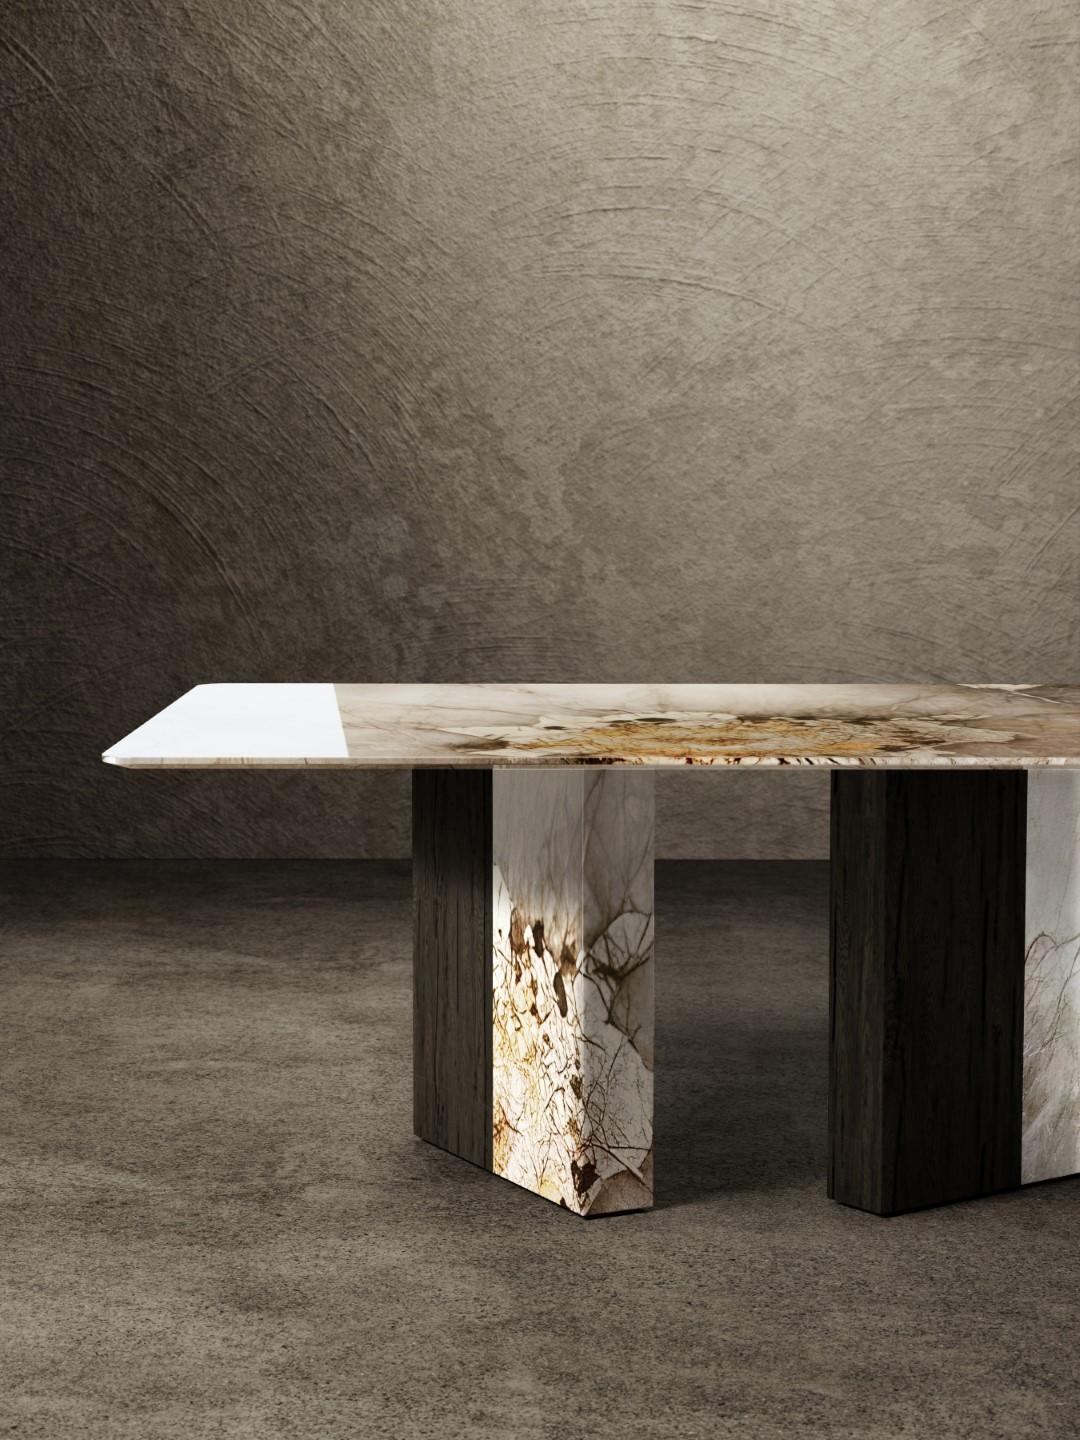 patagonia marble table